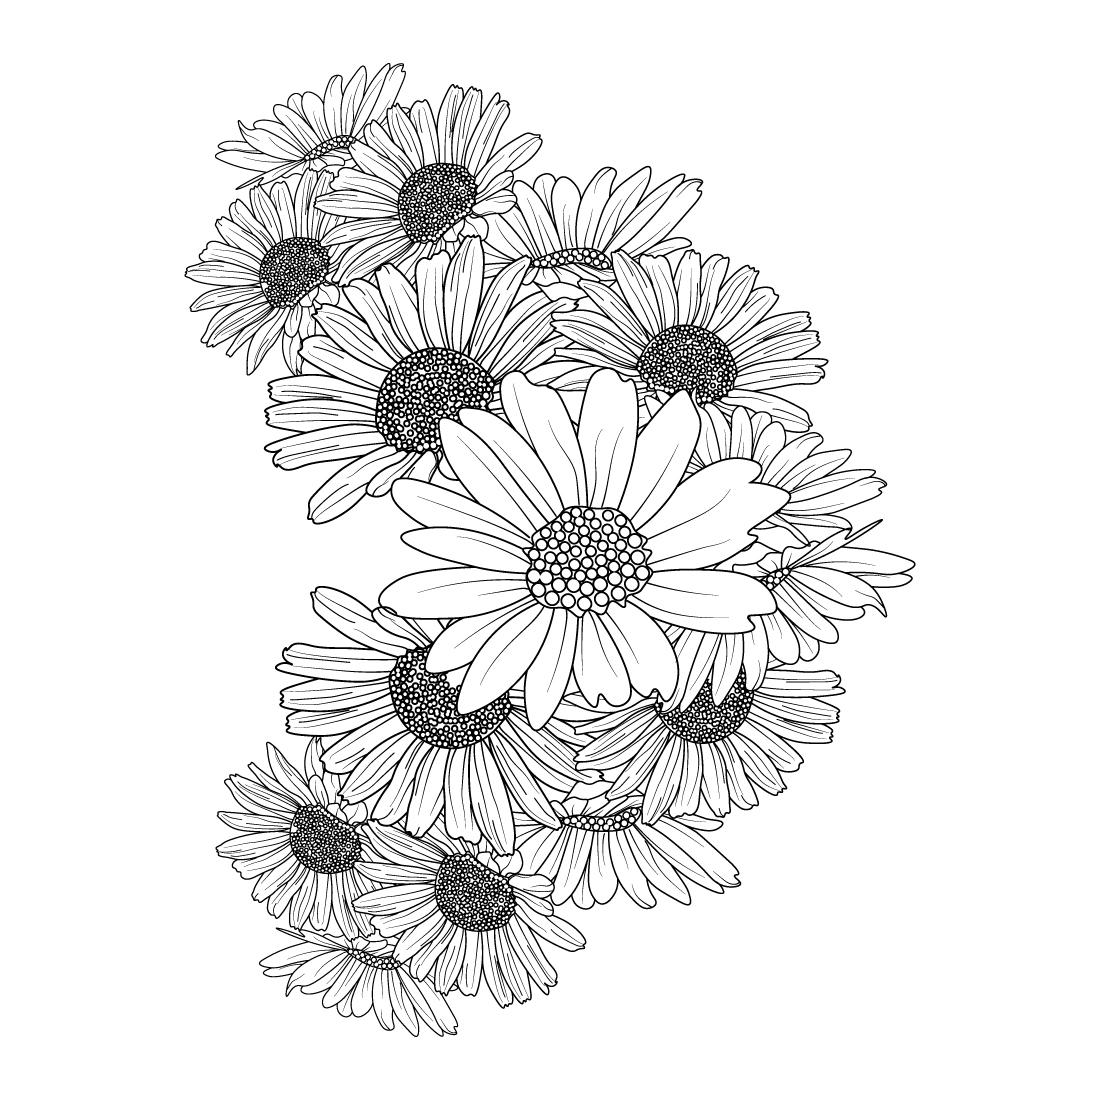 Single flower line drawing Royalty Free Vector Image